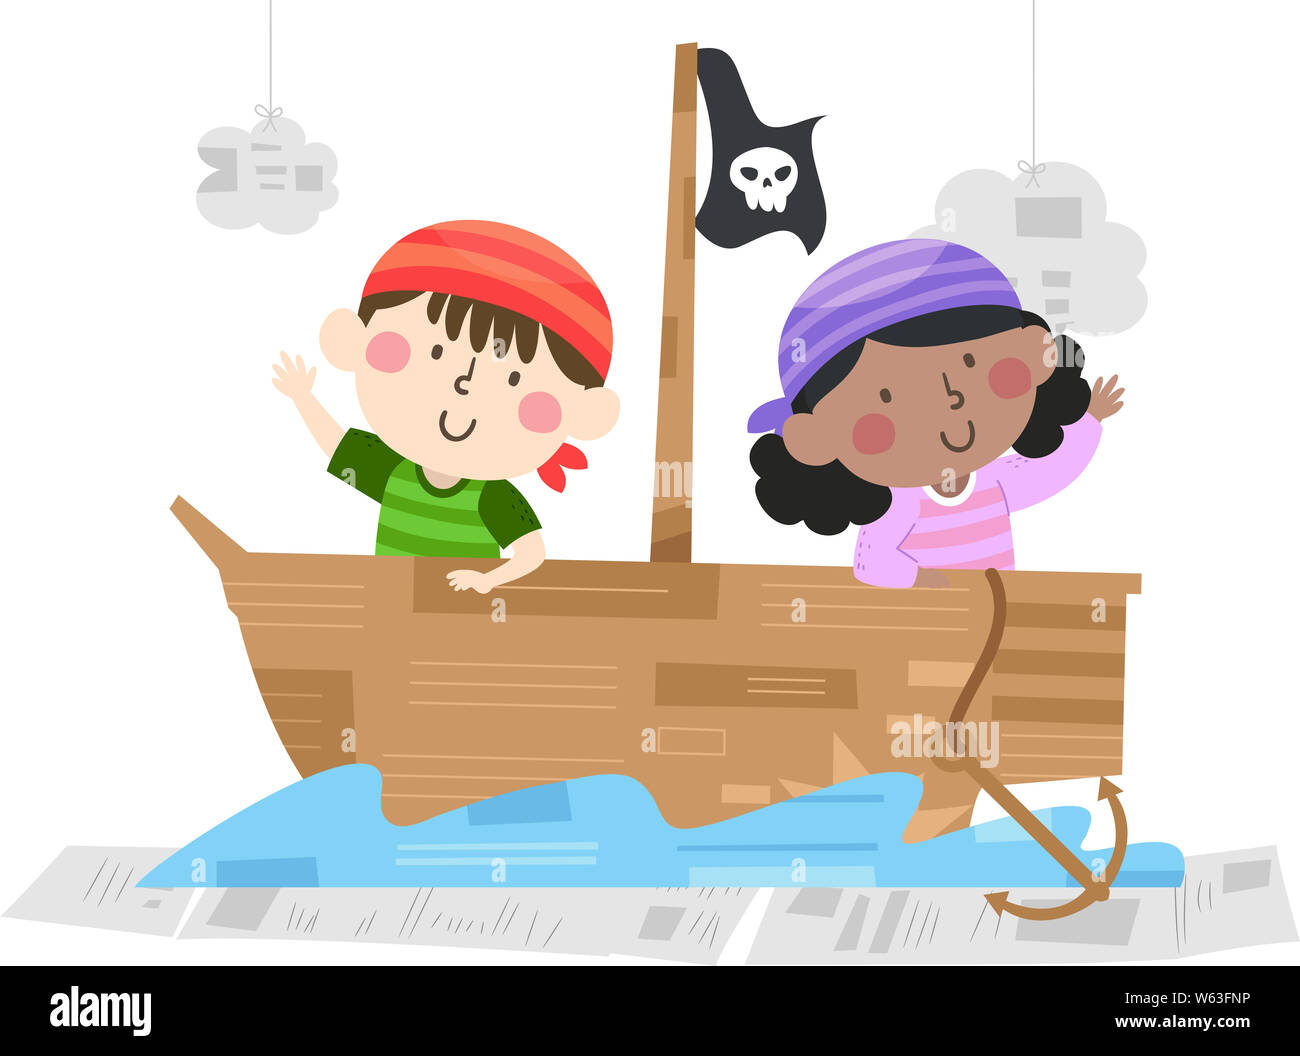 Illustration of Kids Wearing Pirate Costume Riding Ship on Water on Props  Made from Recycled Paper Stock Photo - Alamy